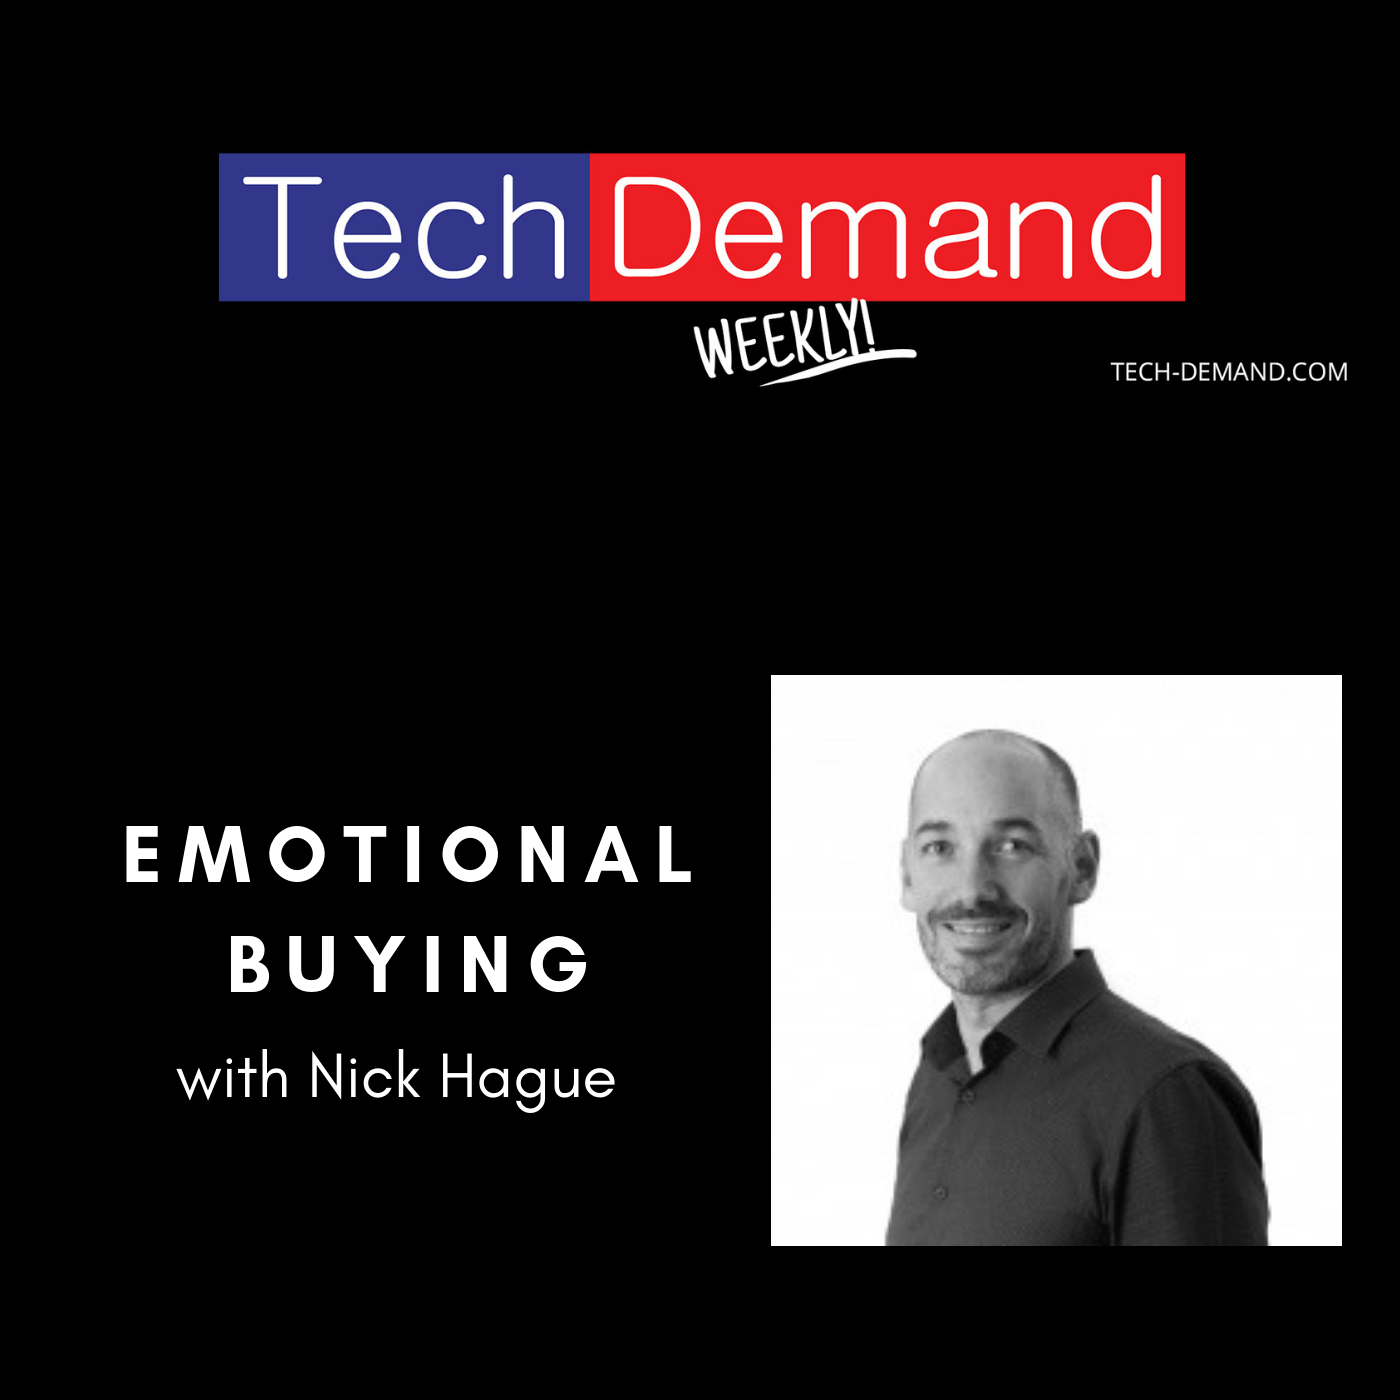 Episode Artwork. Tech demand weekly logo across the top. Title of episode on left and picture of Nick Hague on the right